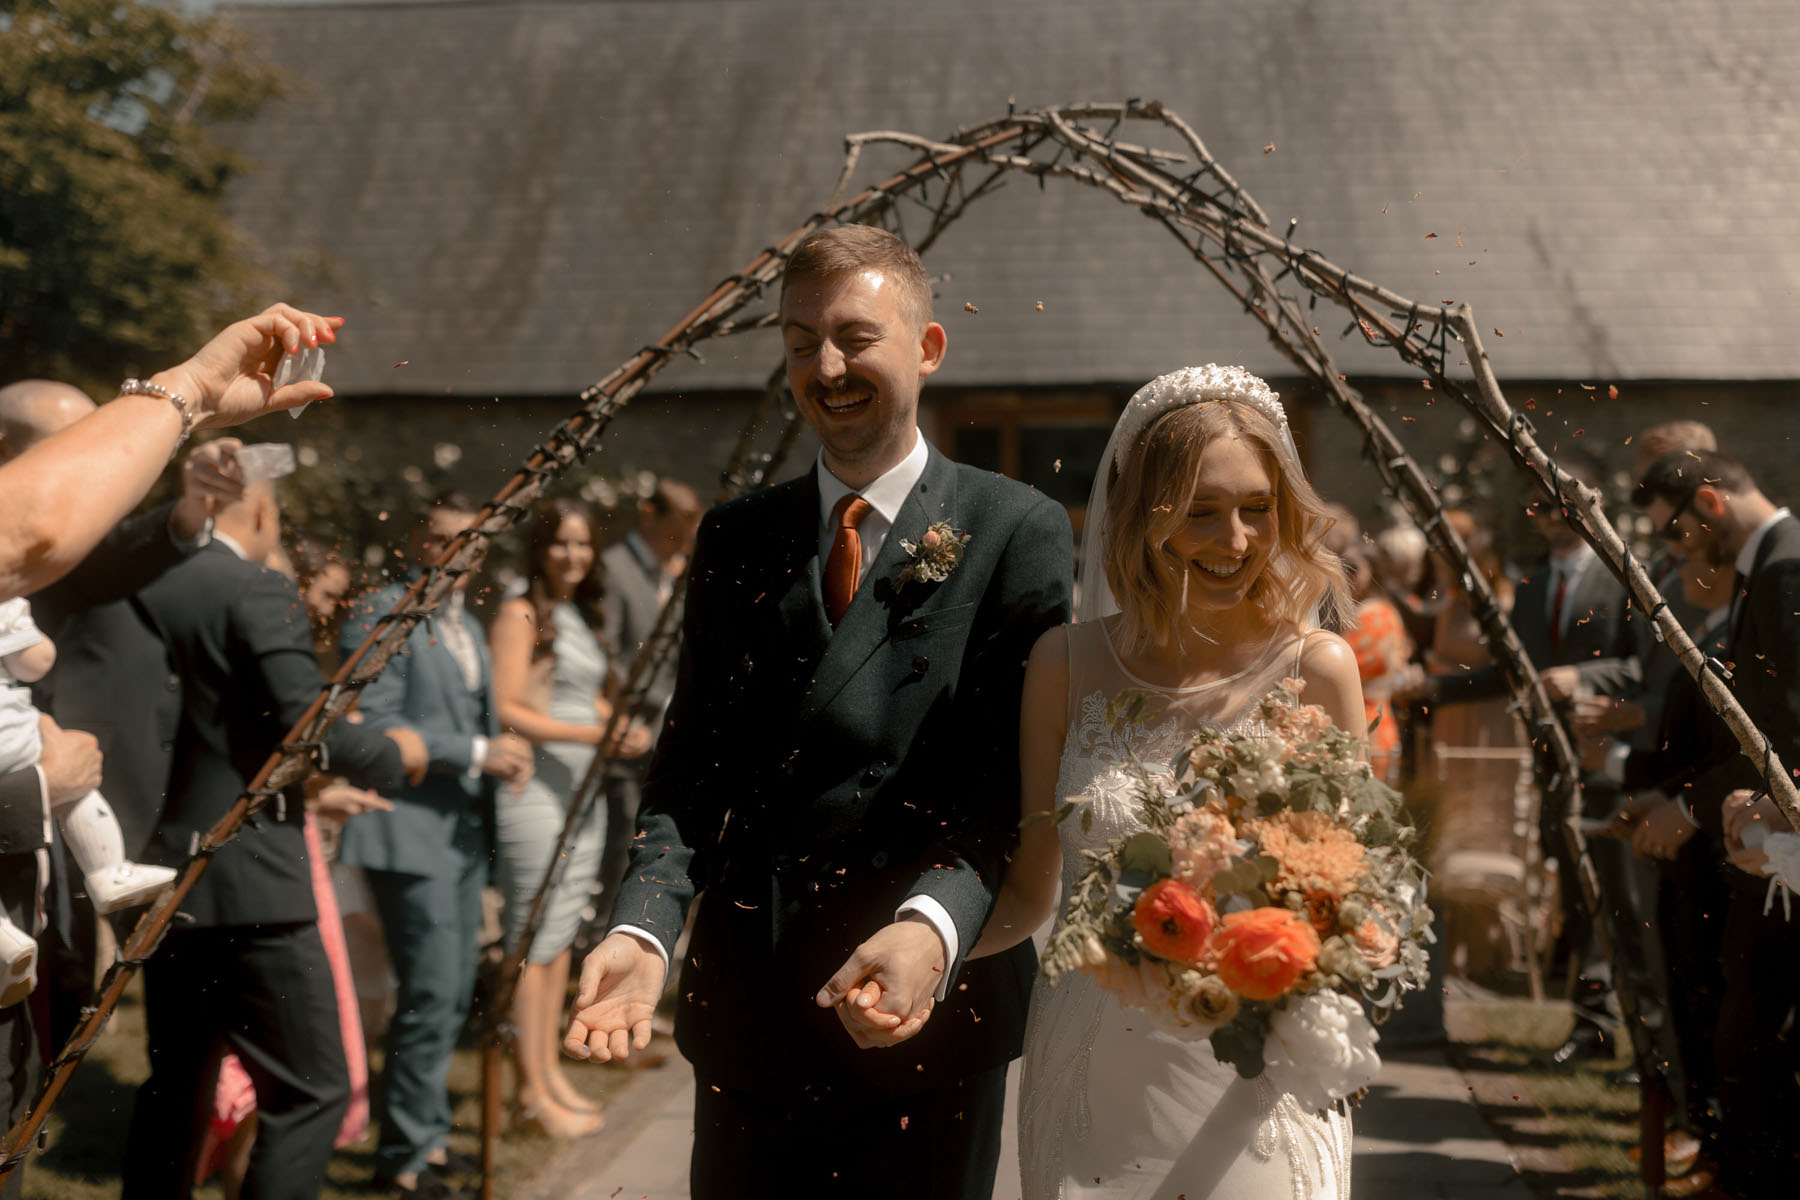 Outdoor wedding at Wick Farm, Bath. Bride carries a bright & colourful bouquet in whites and oranges.